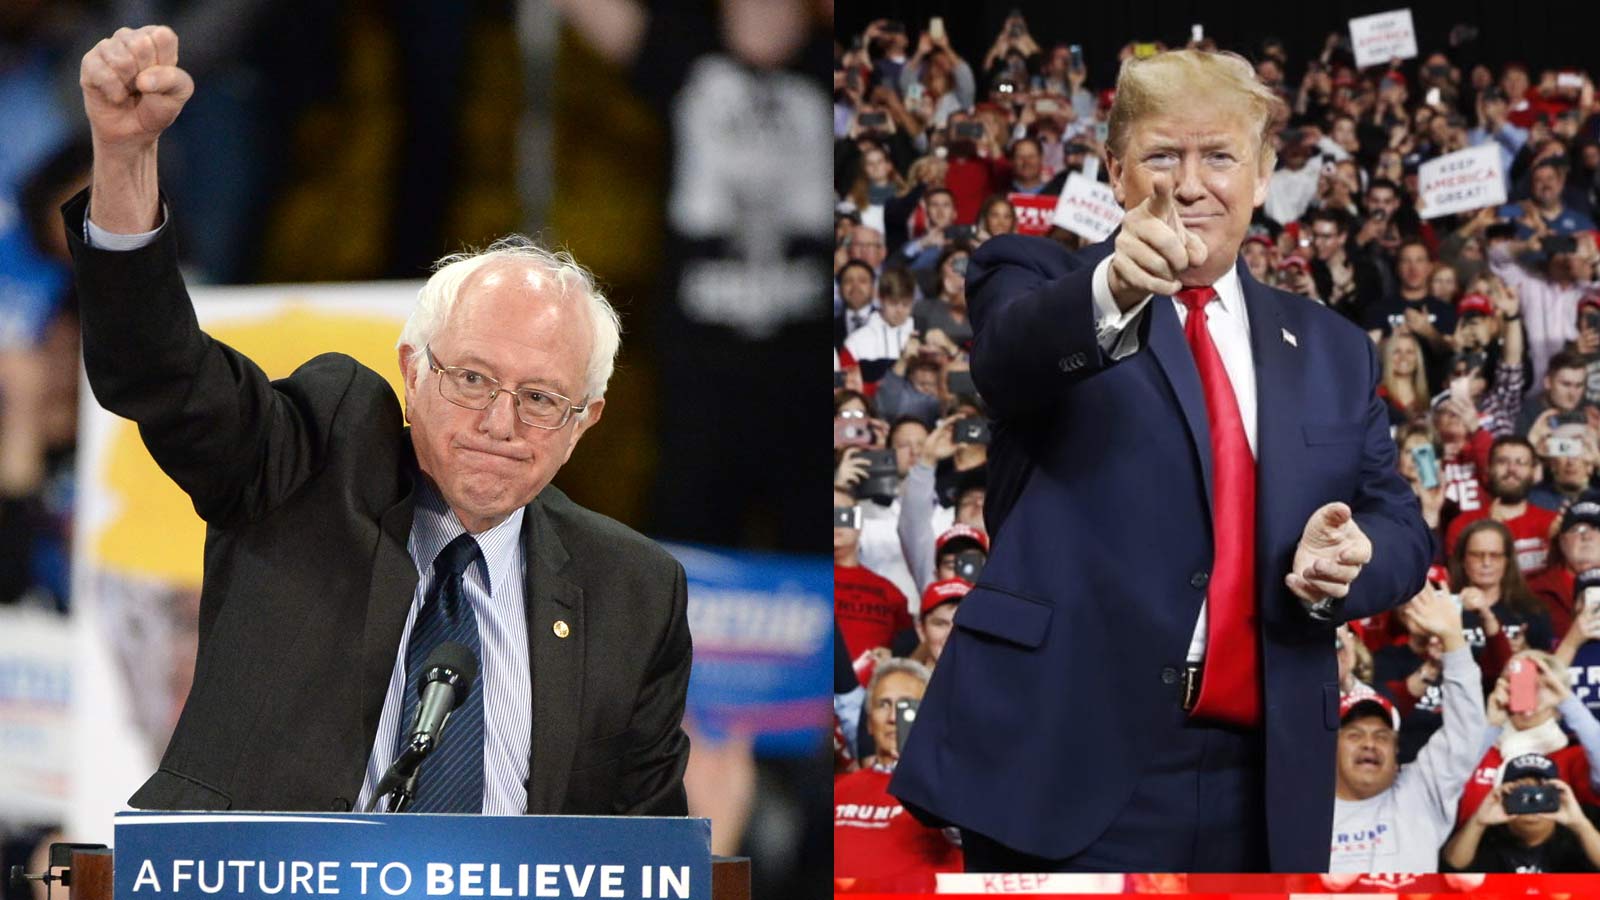 What Do Bernie Sanders and Donald Trump Have In Common? - Election Central3 日前